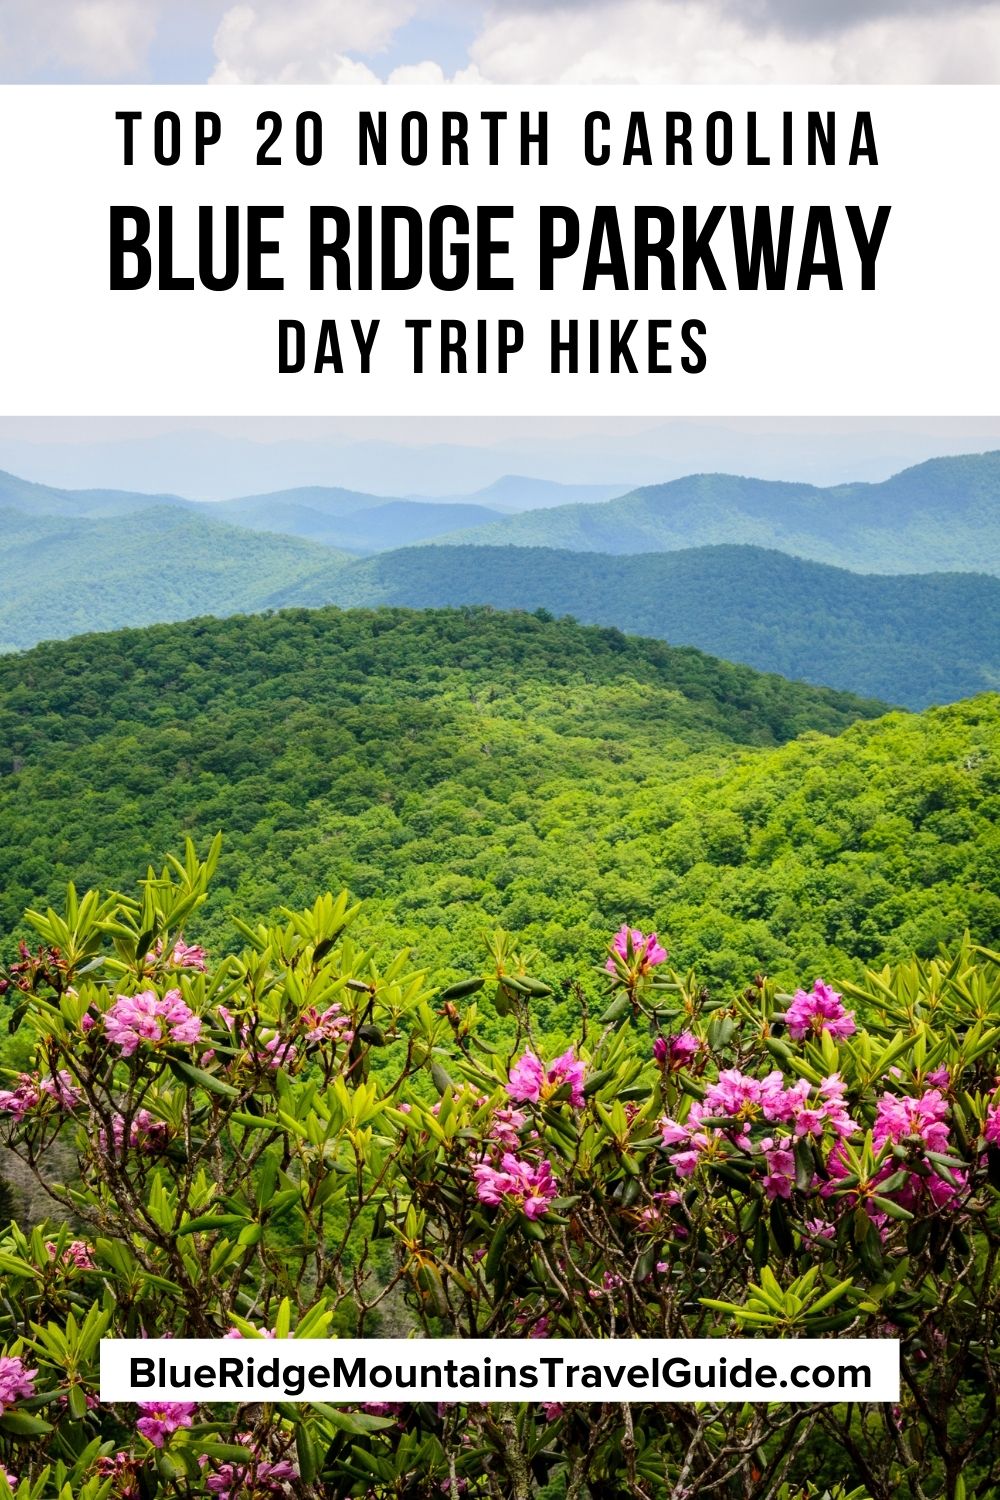 The 25 Best Blue Ridge Parkway Hikes for NC Day Trips